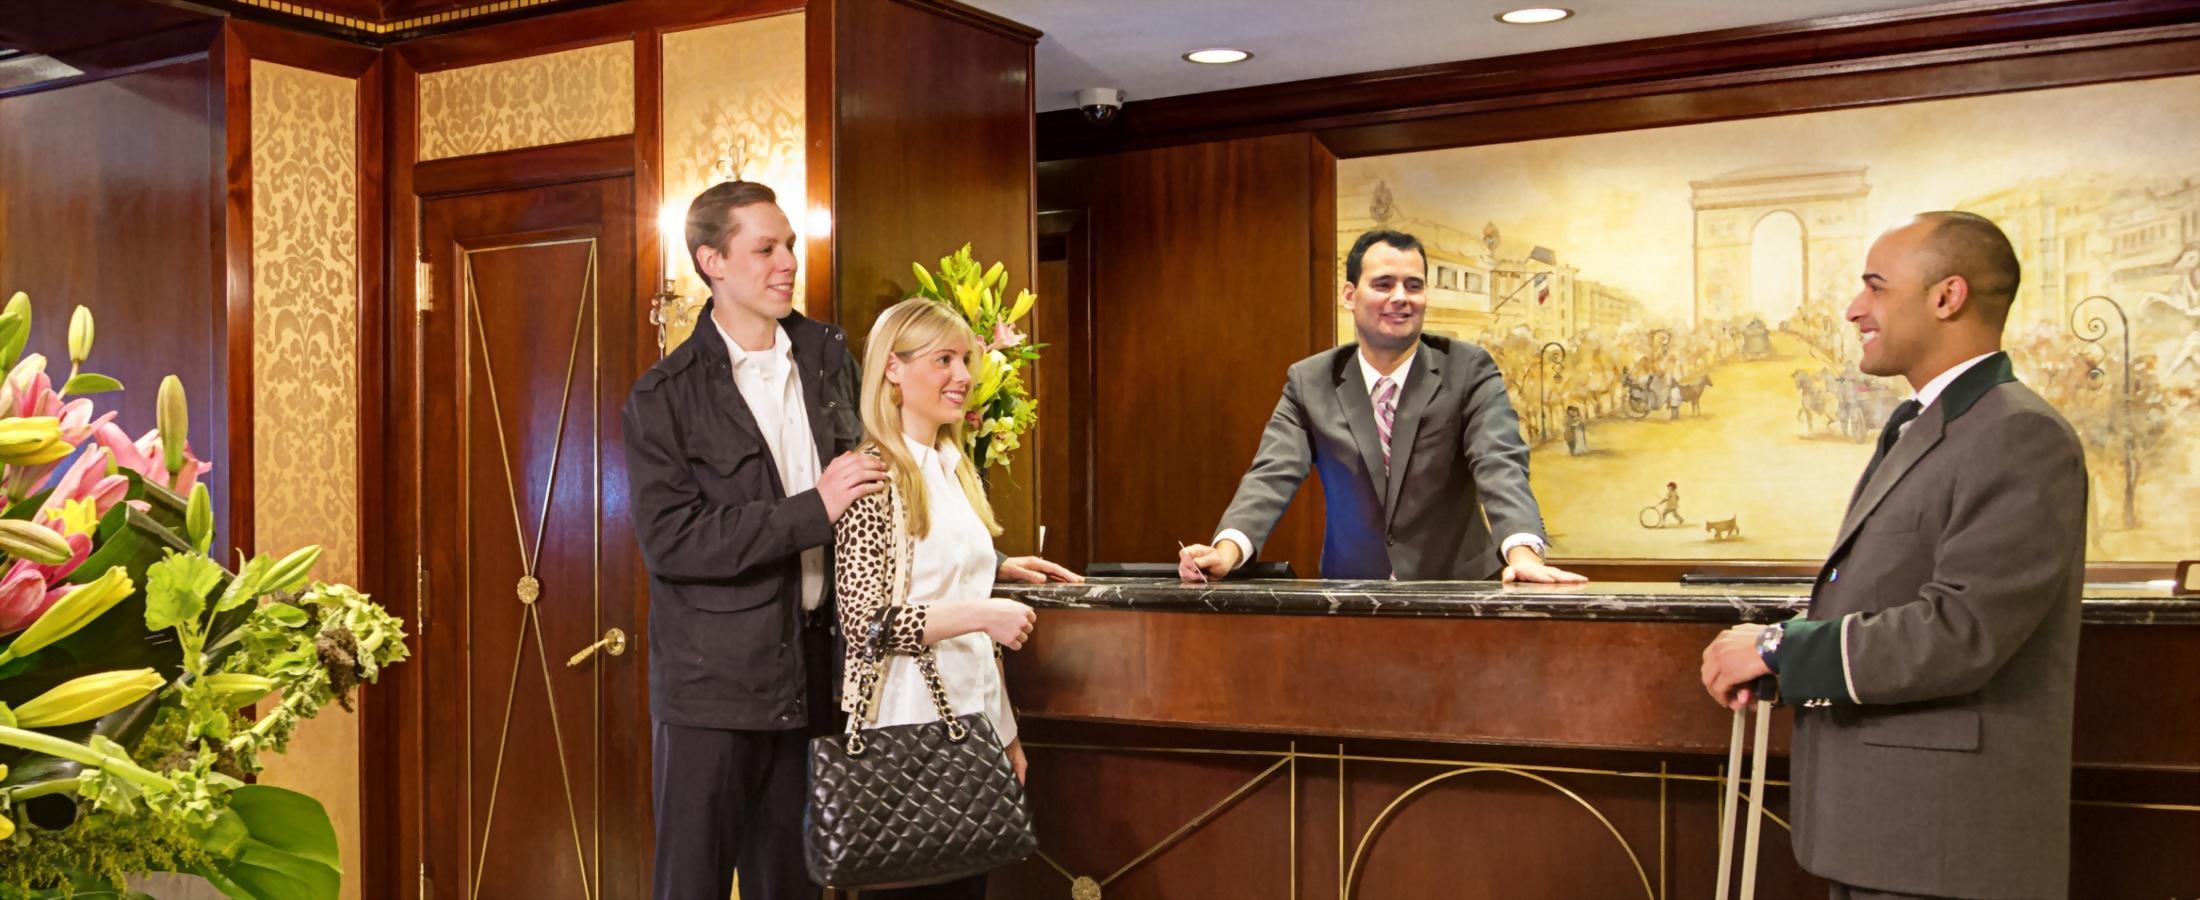 couple checking in at front desk with help from the bellman and guest service agent